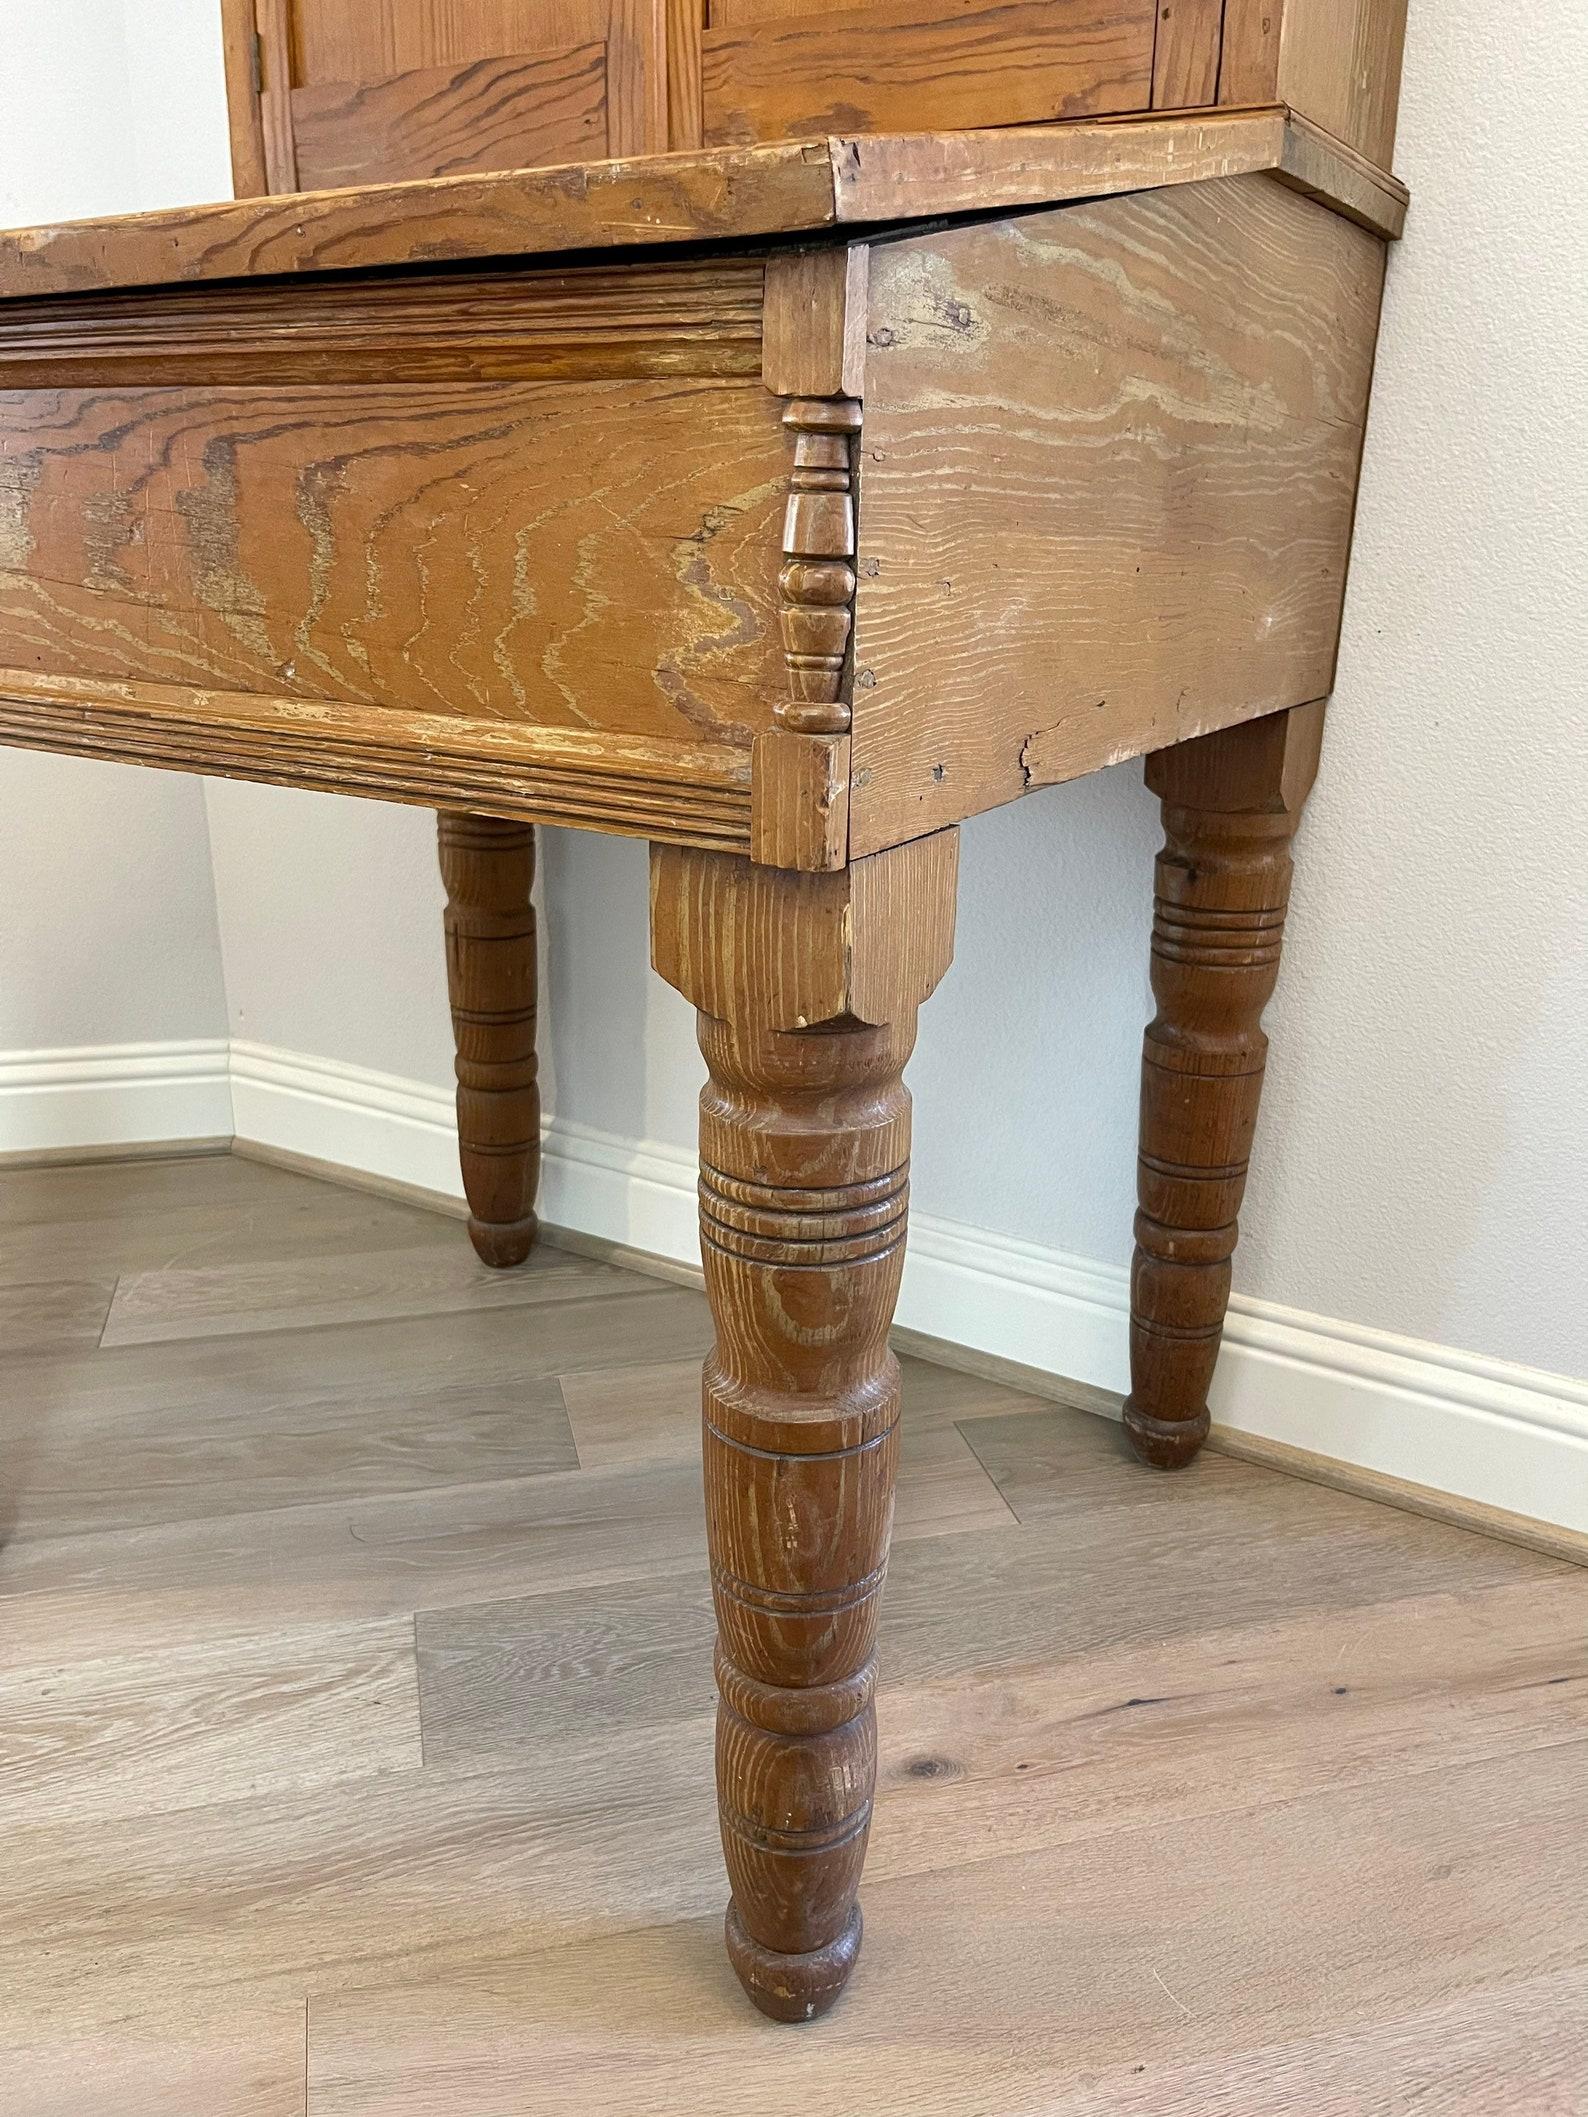 Antique Early American 19th Century Pine Plantation Desk In Good Condition For Sale In Forney, TX